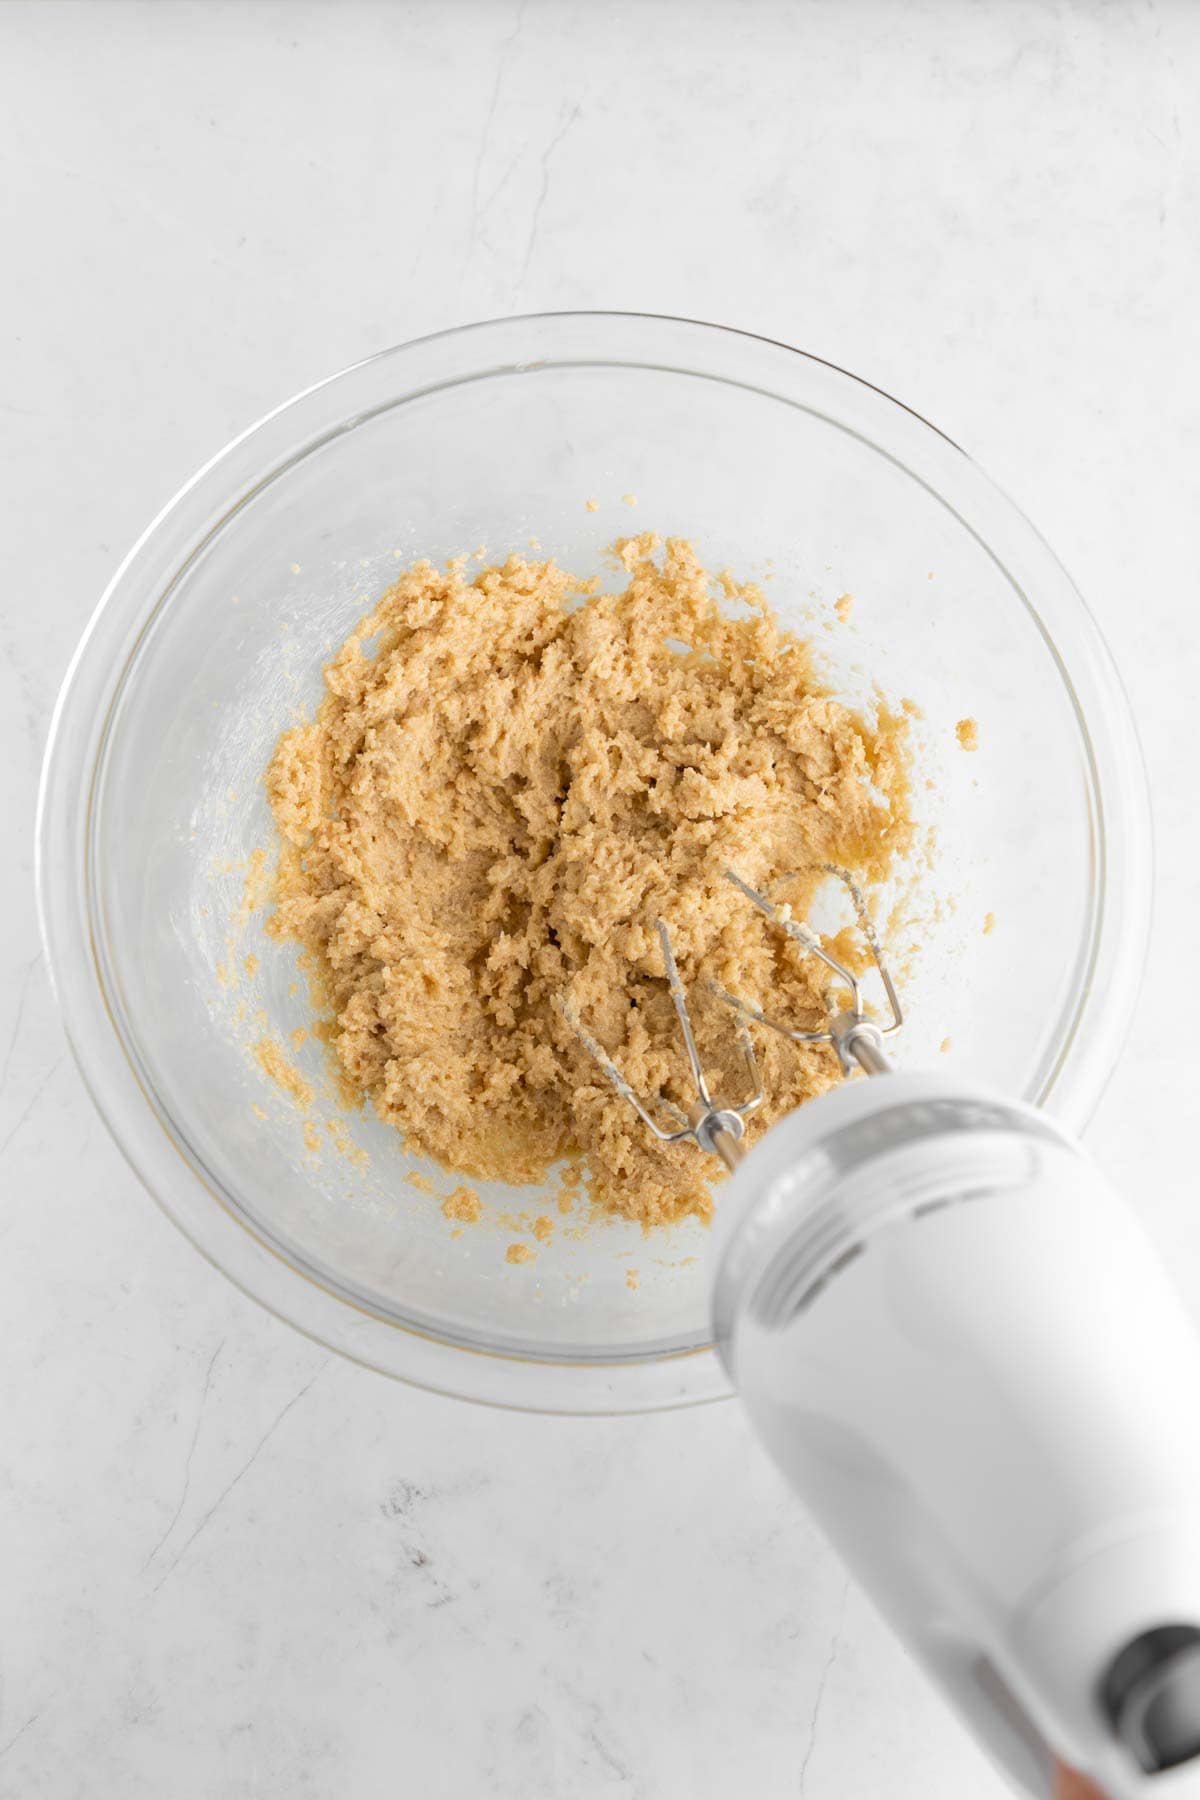 a handheld mixer creaming vegan butter and sugar together in a glass mixing bowl